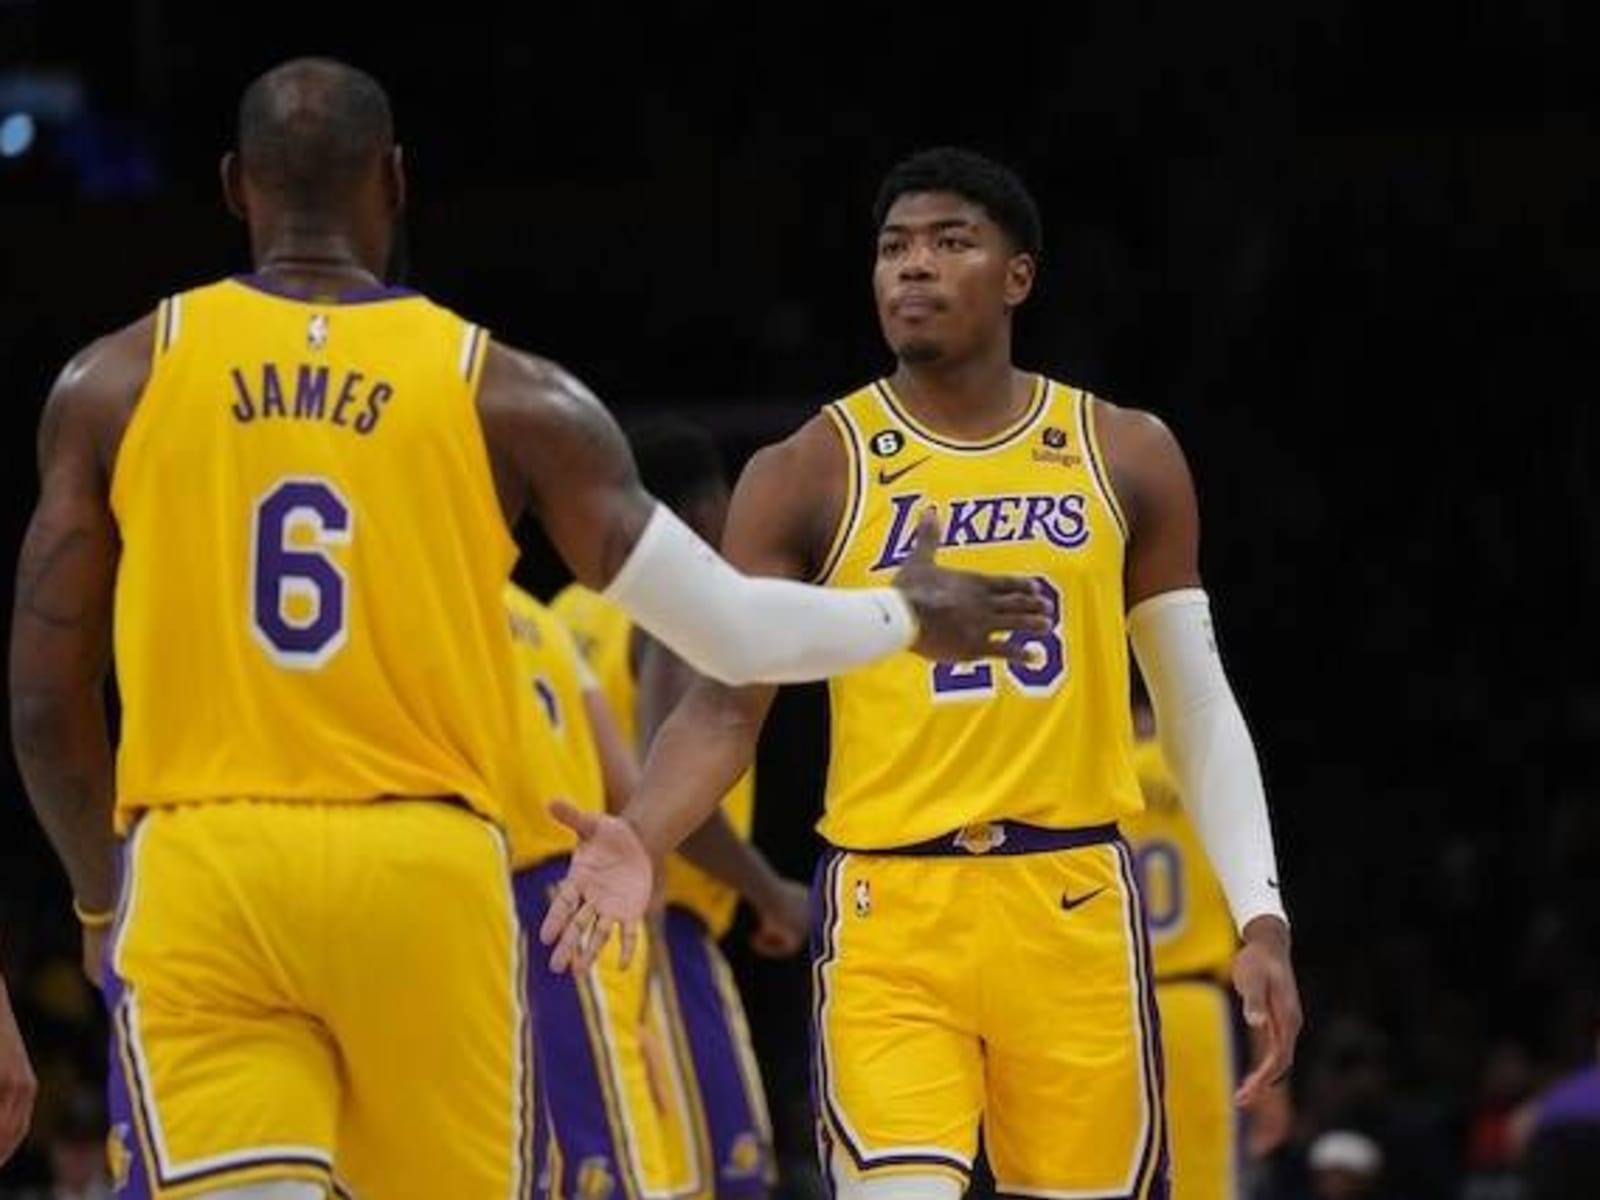 Lakers Practice ! LeBron James & Rui Hachimura are the last 2 in the gym  working 